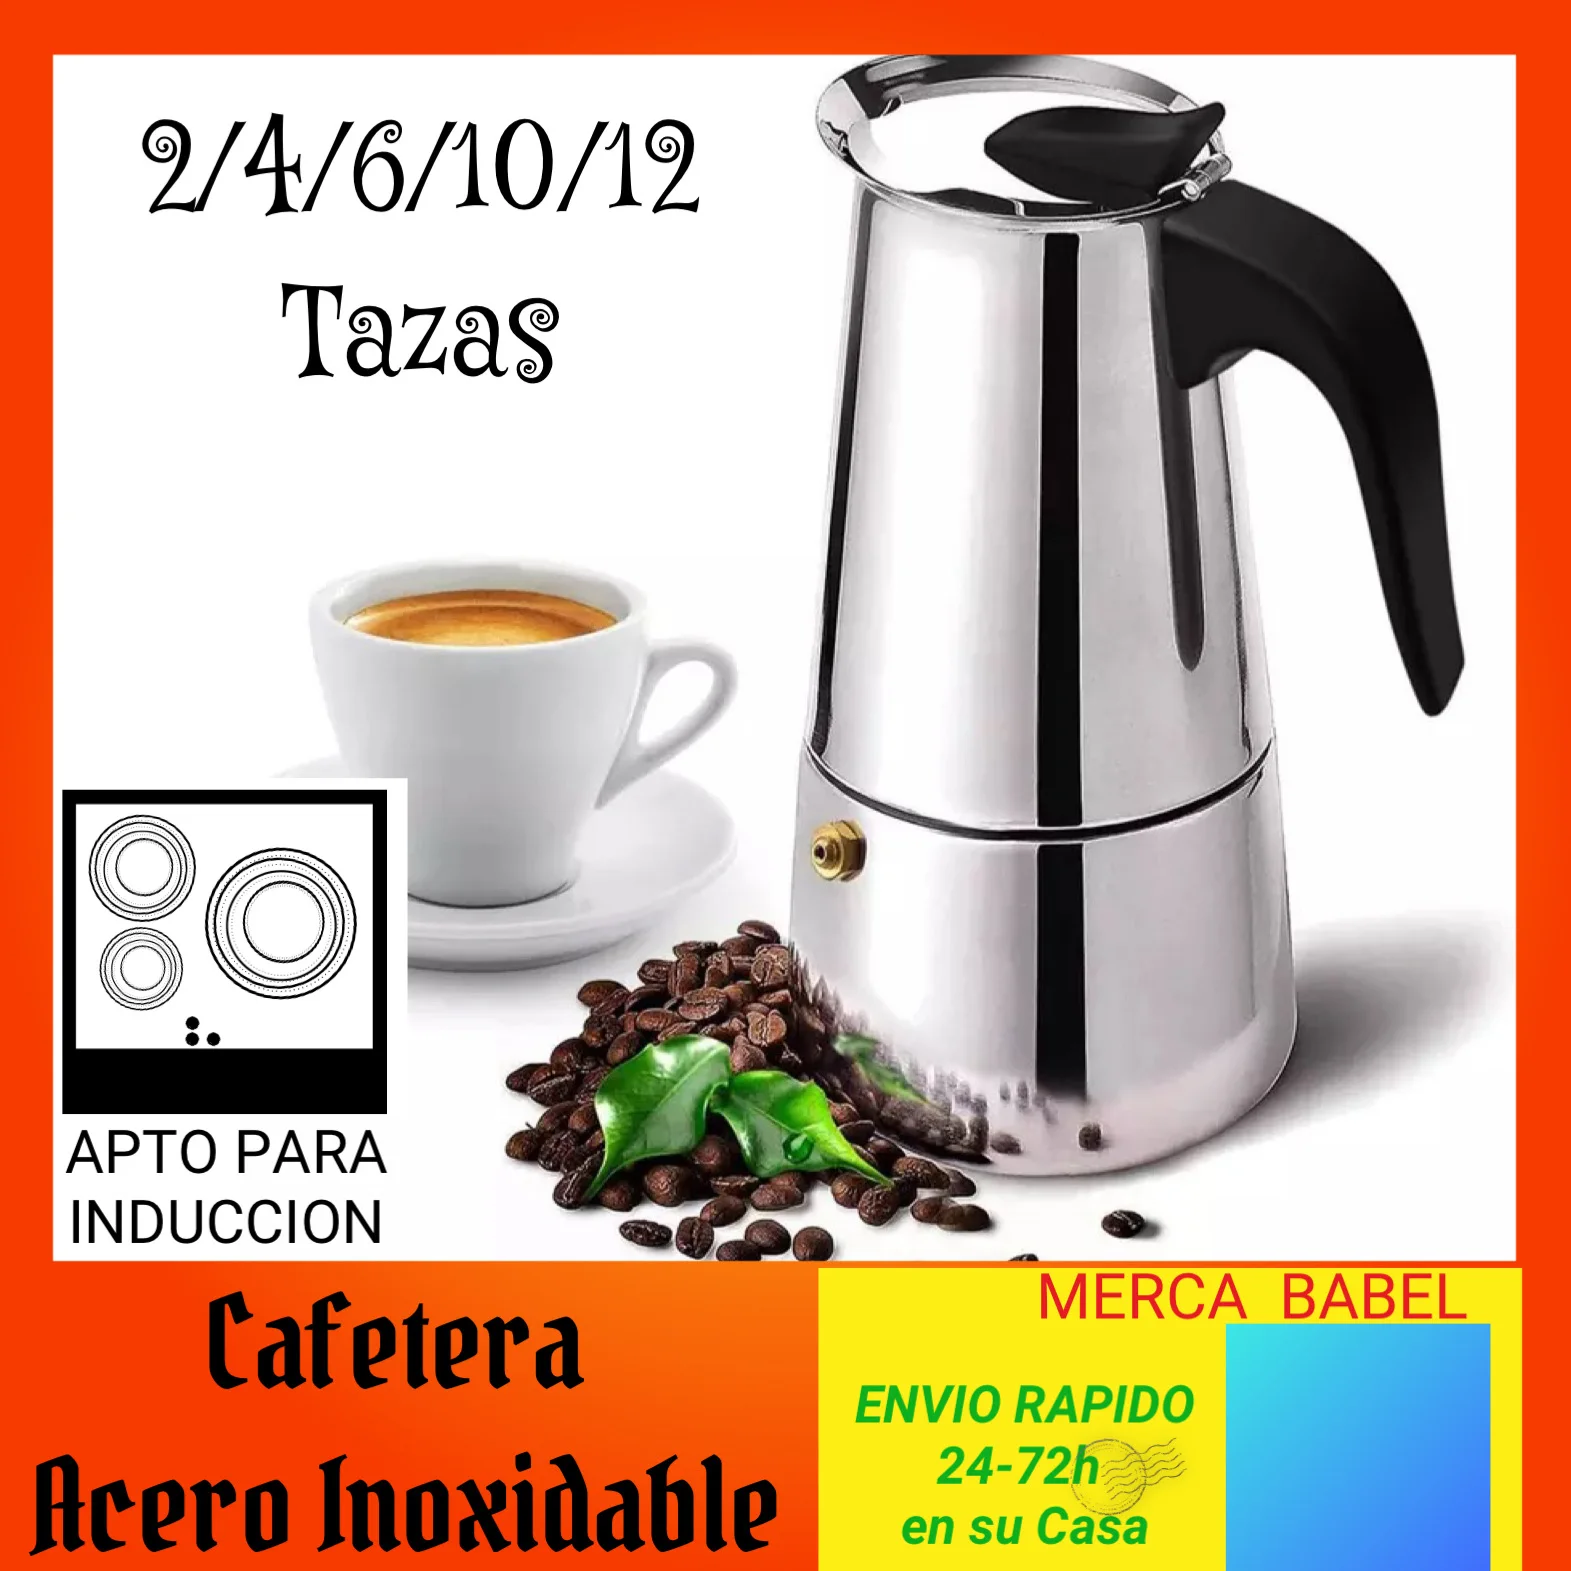 Italian coffee maker suitable for all types of cooking including induction, 2 4 6 10 and 12 cups, Express coffee machine for plates, Gas,  vitroceramic, electric, induction